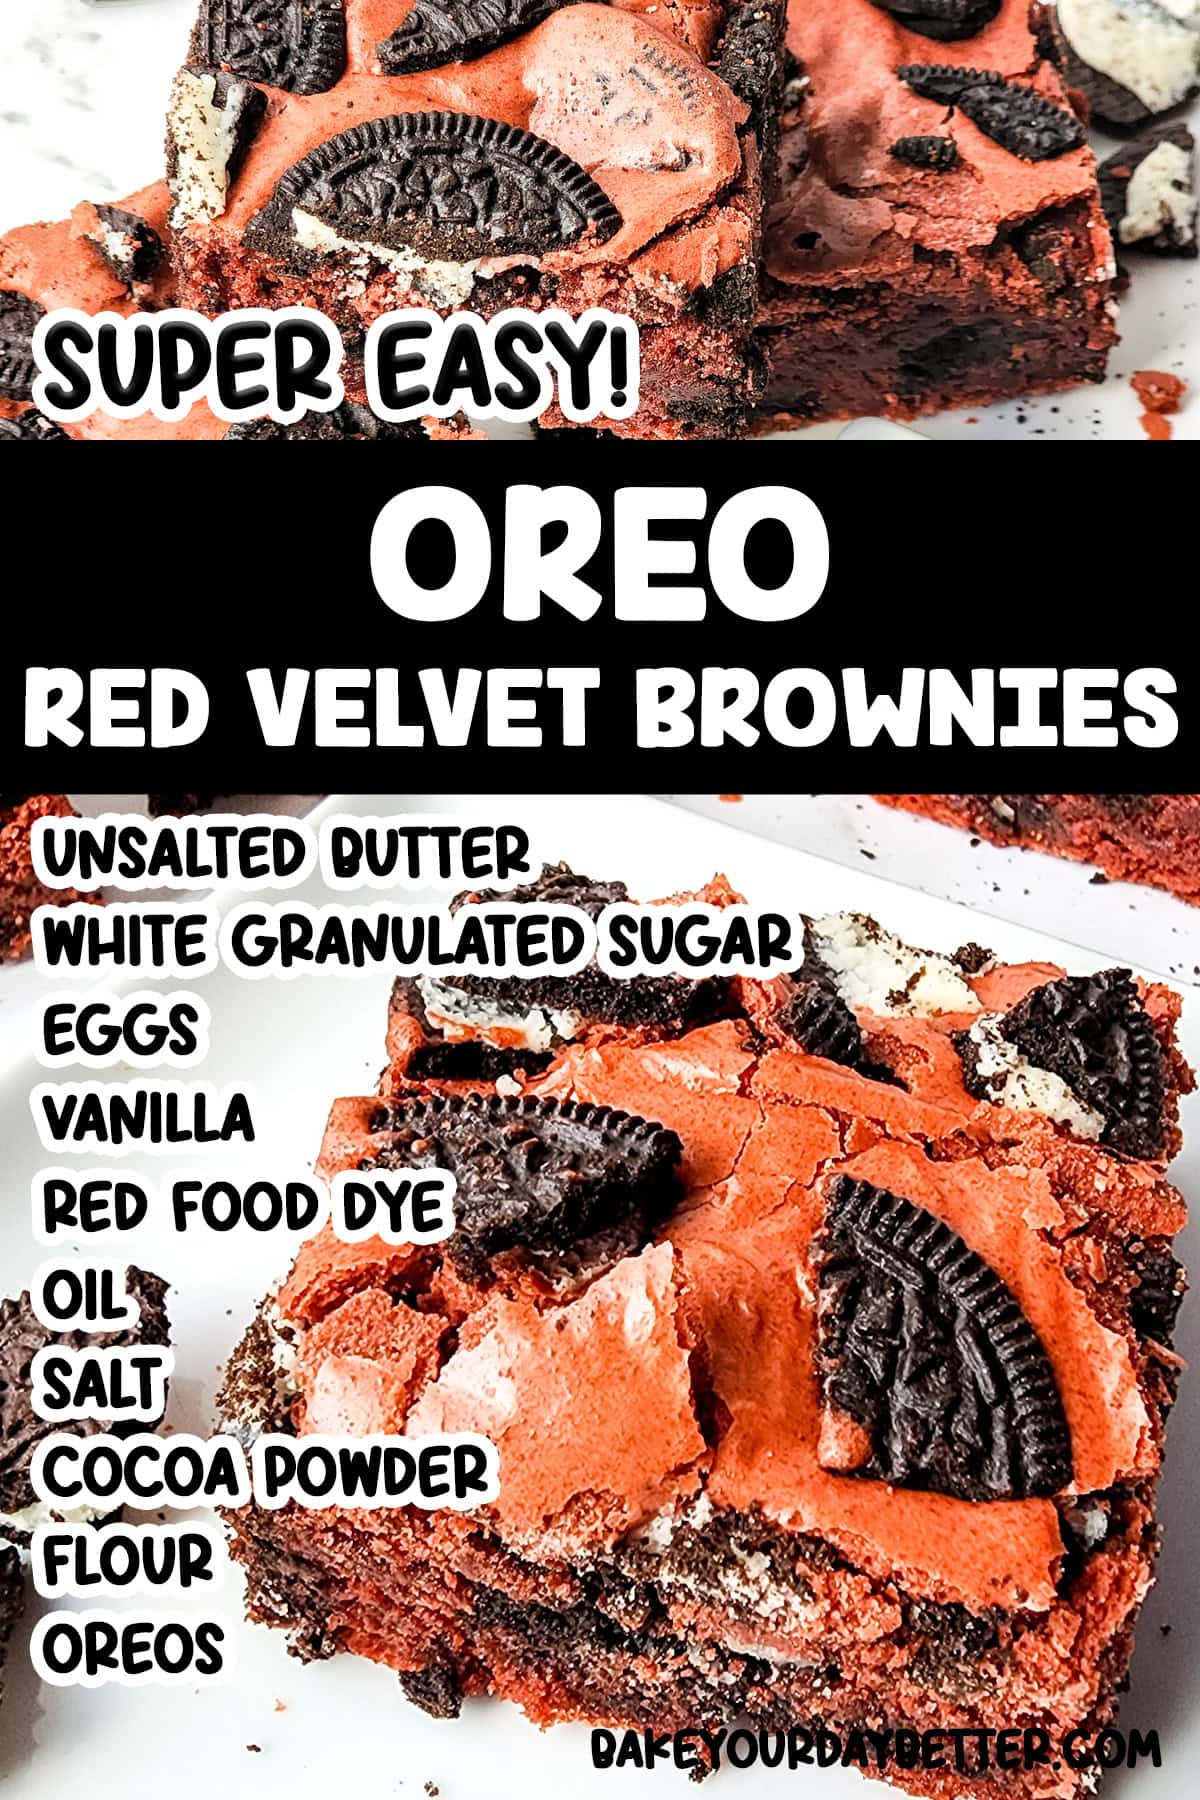 pictures of oreo red velvet brownies with text overlay of ingredients